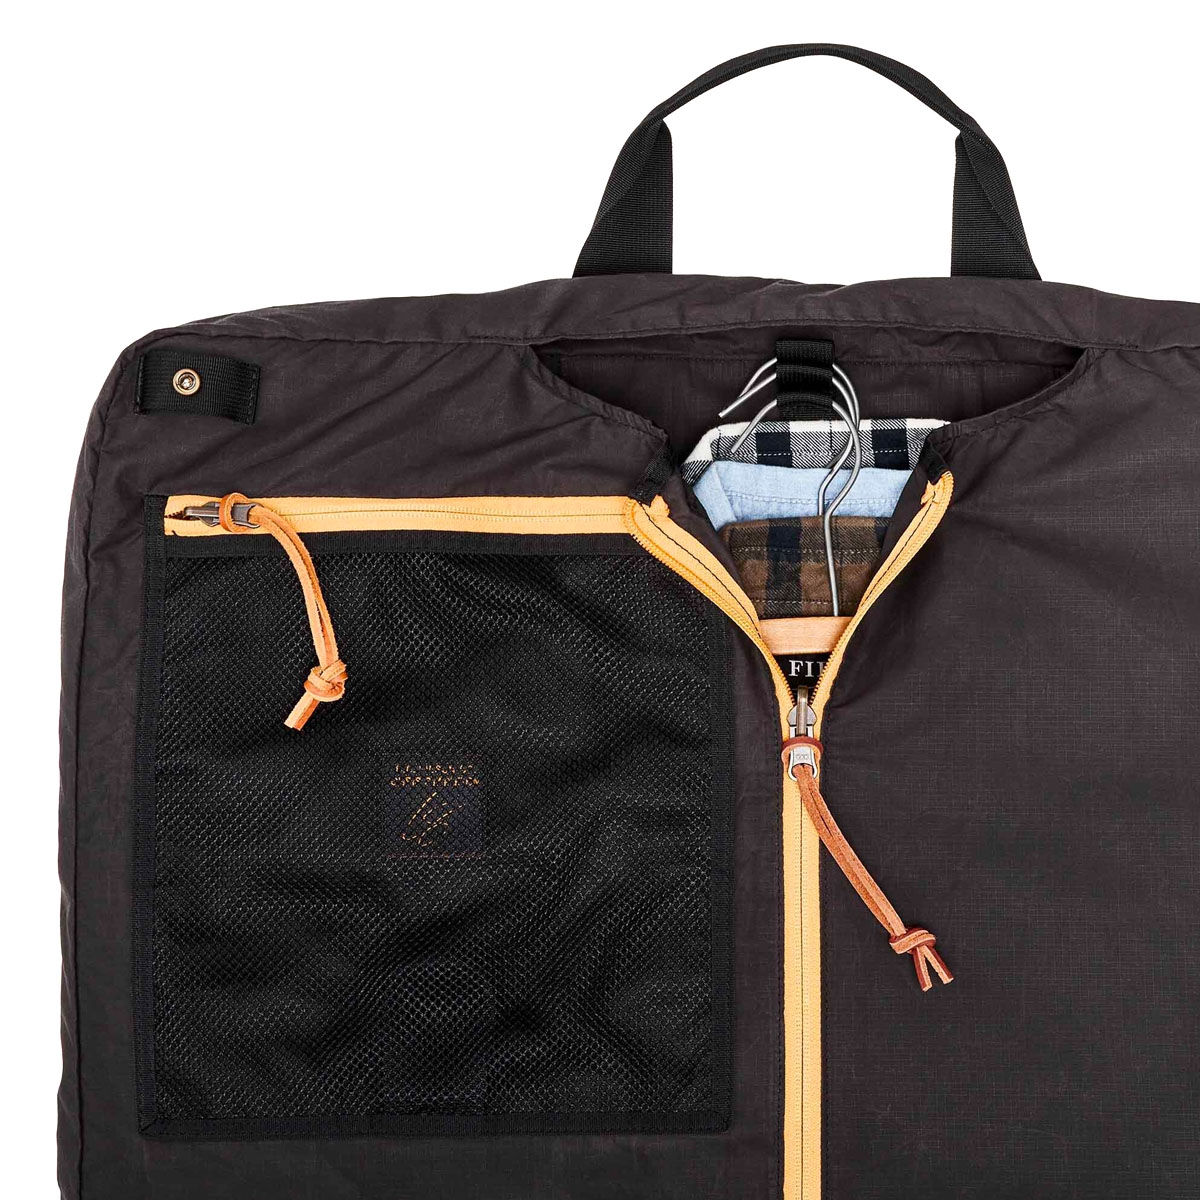 Filson Traveller Suit Cover Stapleton Cinder, webbing handles on the top and bottom allow folded hand carry